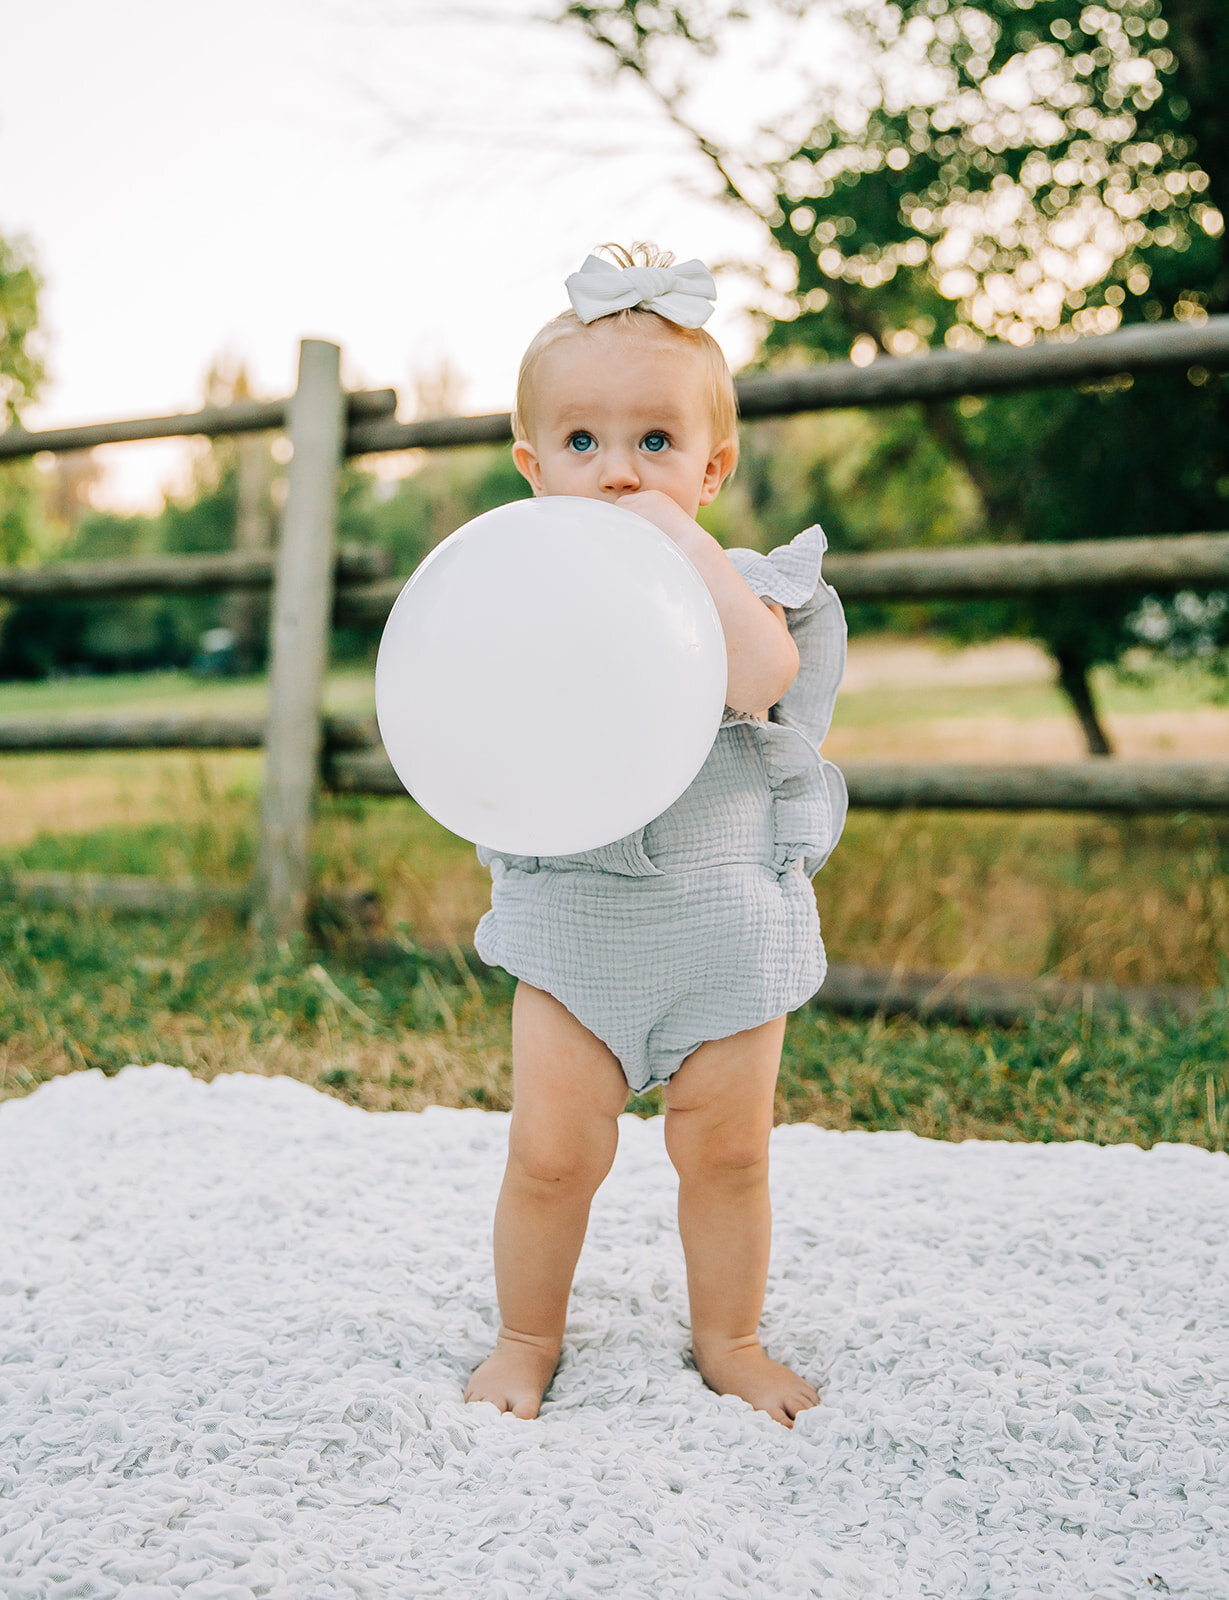  kids outfit inspo first birthday picture ideas birthday girl party ballon baby blowing up ballon kids fashion ideas what to wear to baby photoshoot hair bow inspo prop ideas for kids Logan Utah cache valley photographer baby girl turning one big blu